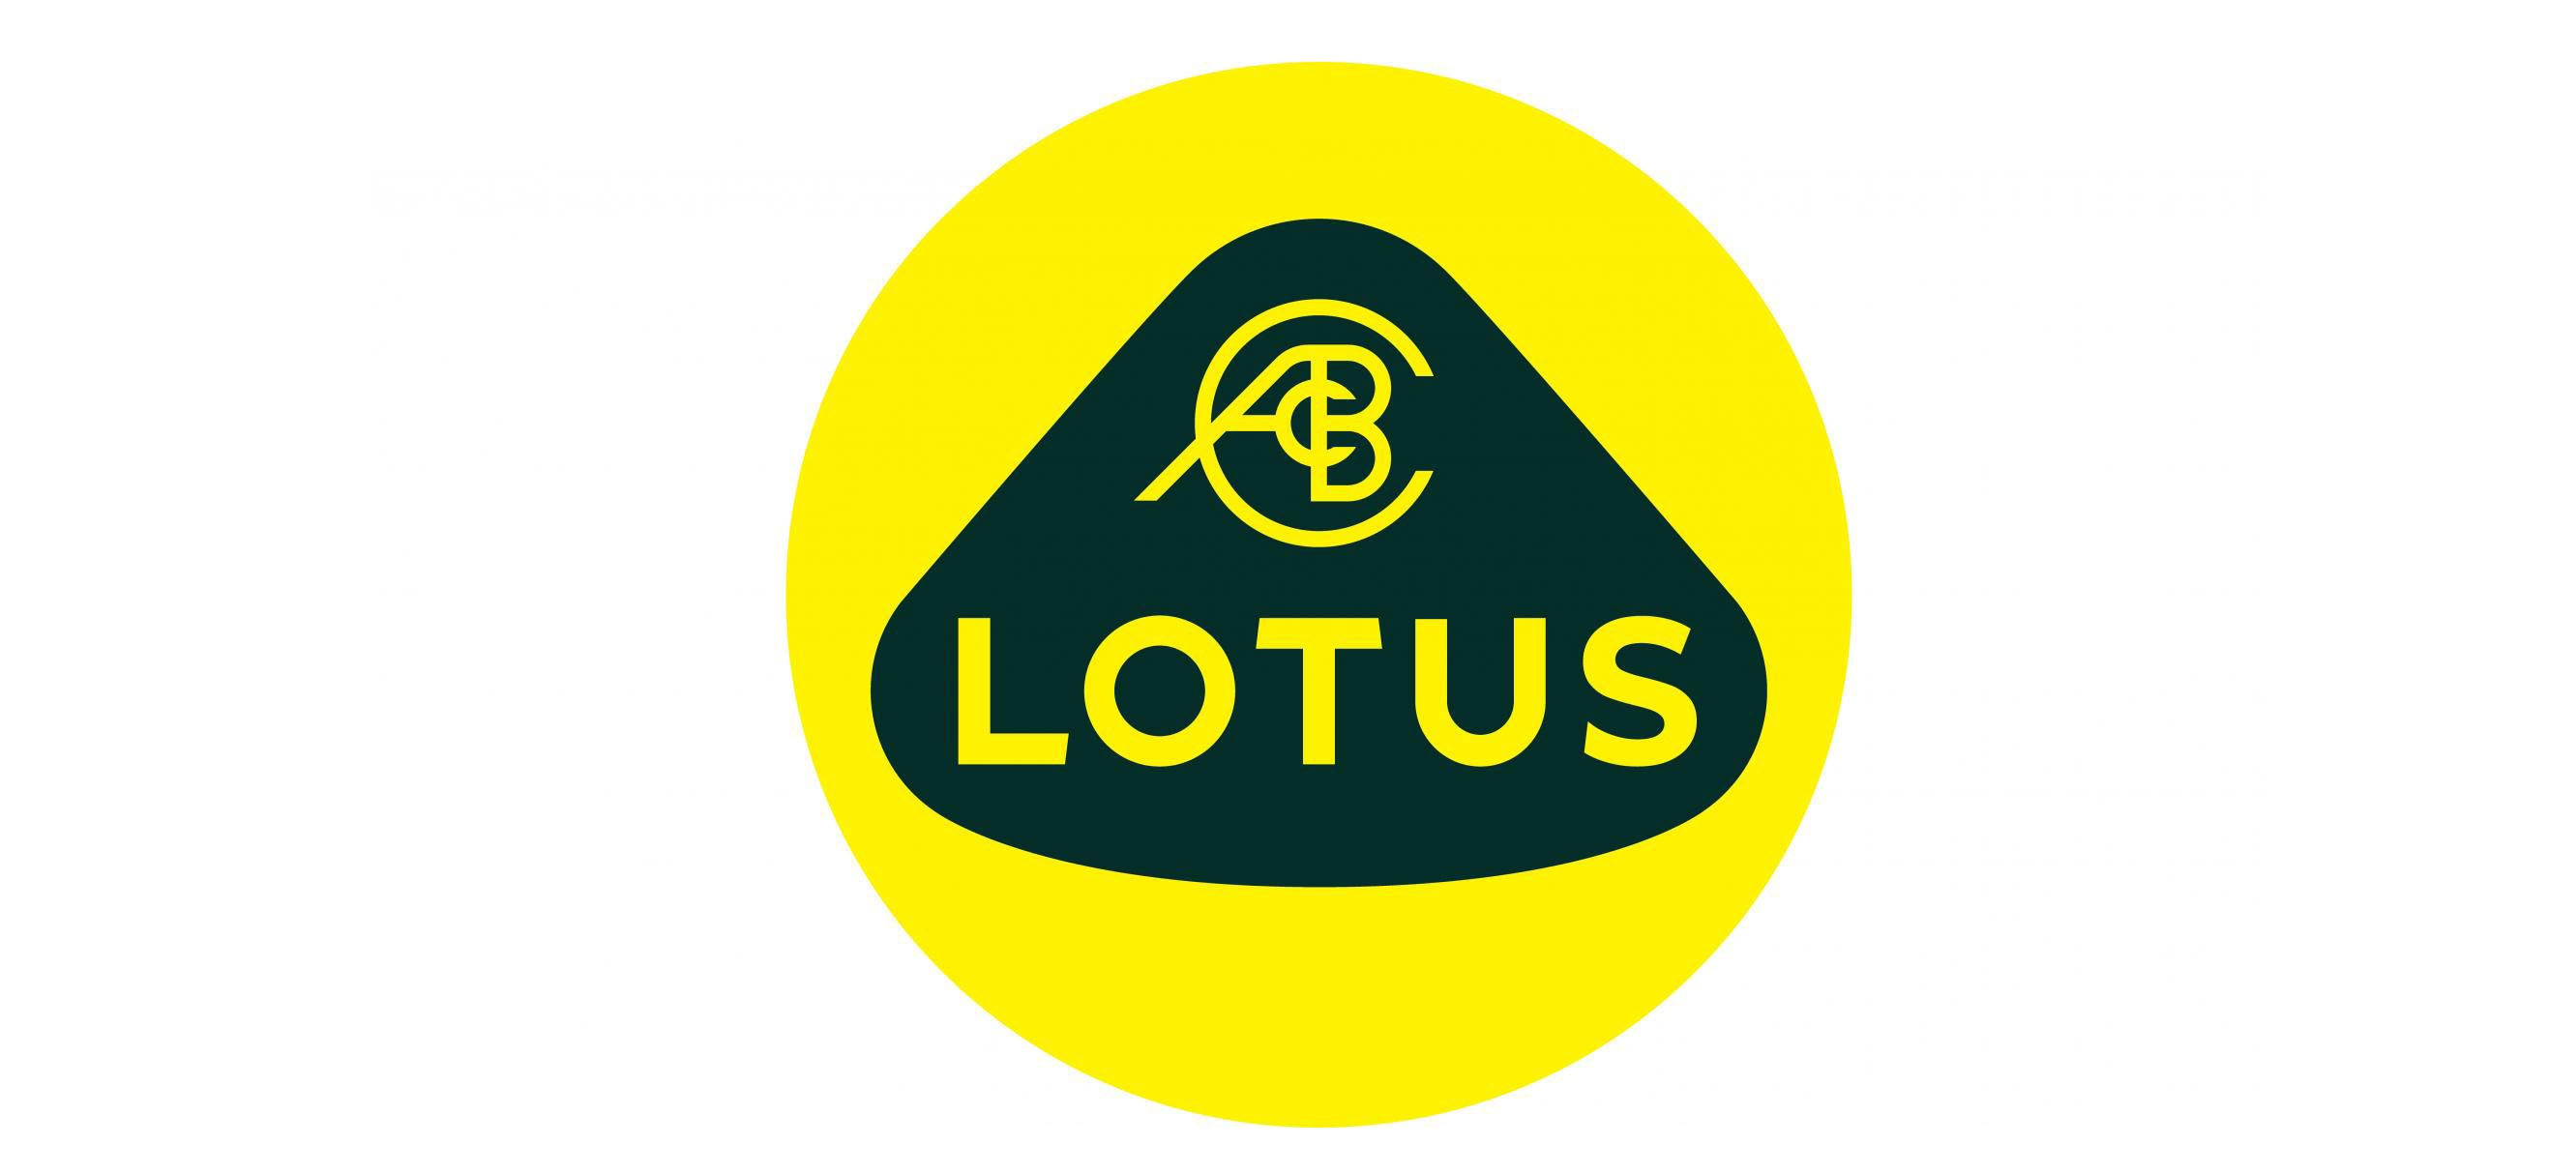 TopGear | What do you think of Lotus’s new logo?